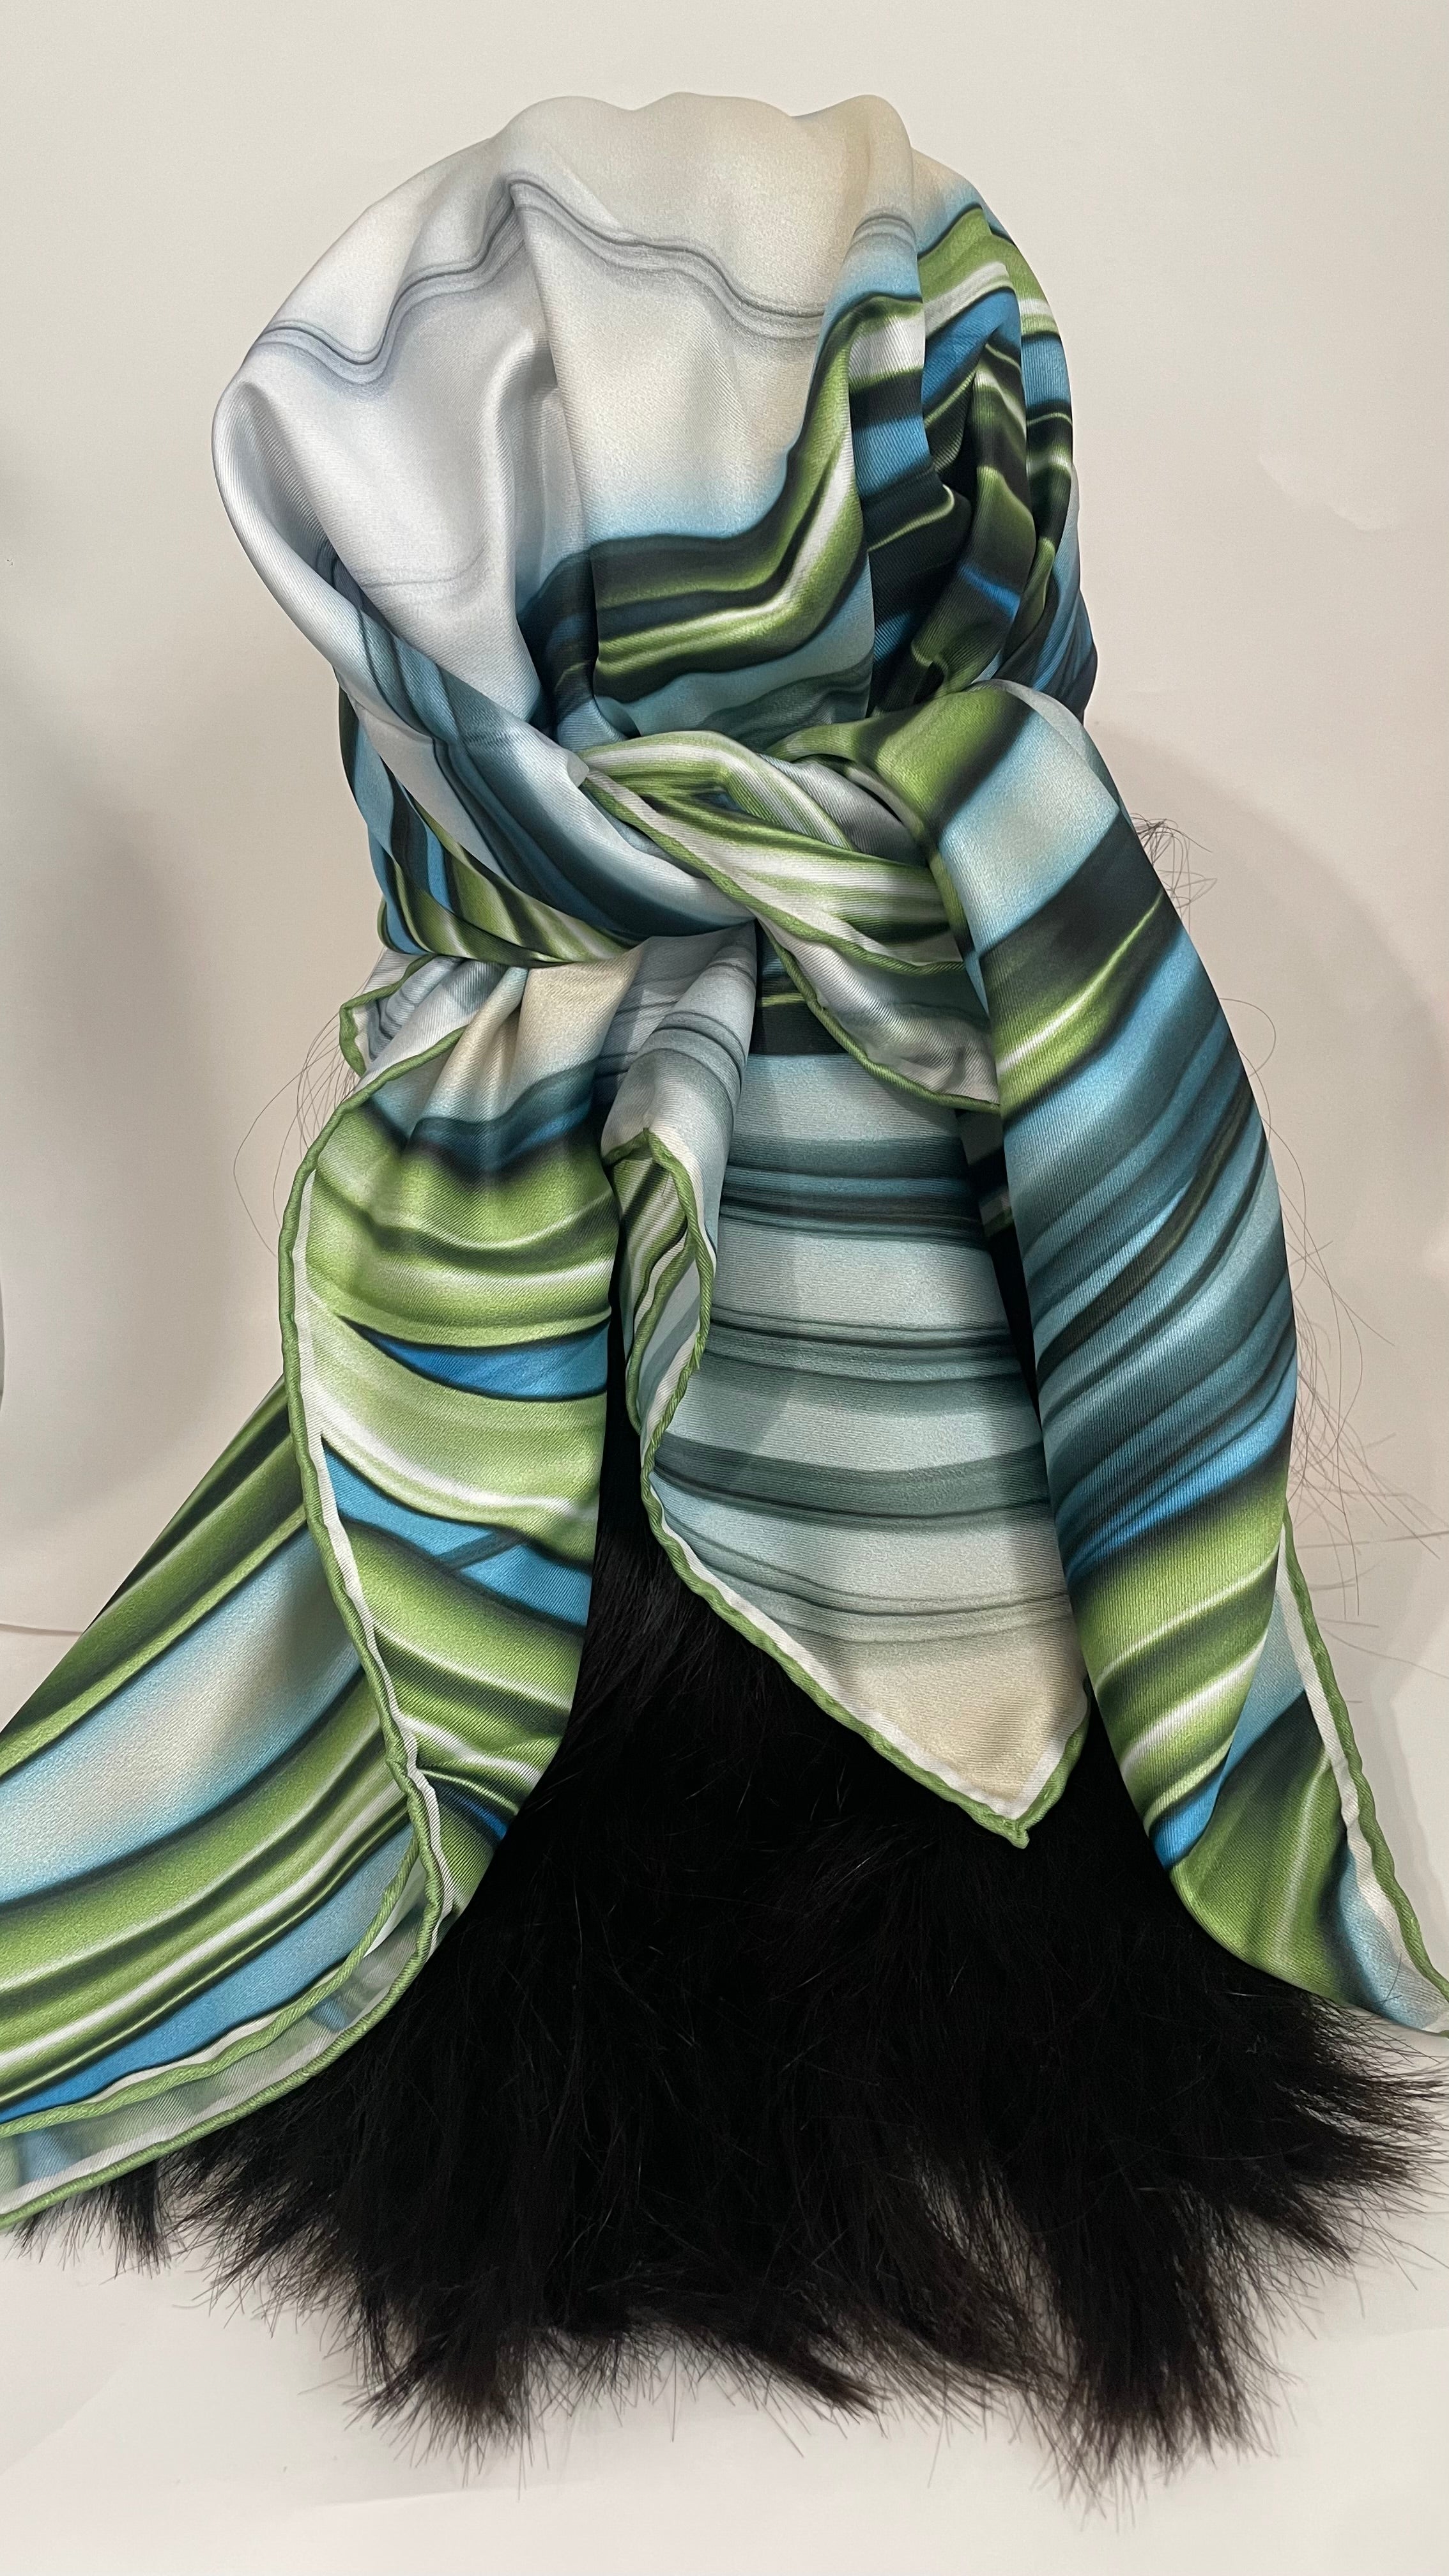 The Wave Satin Scarf